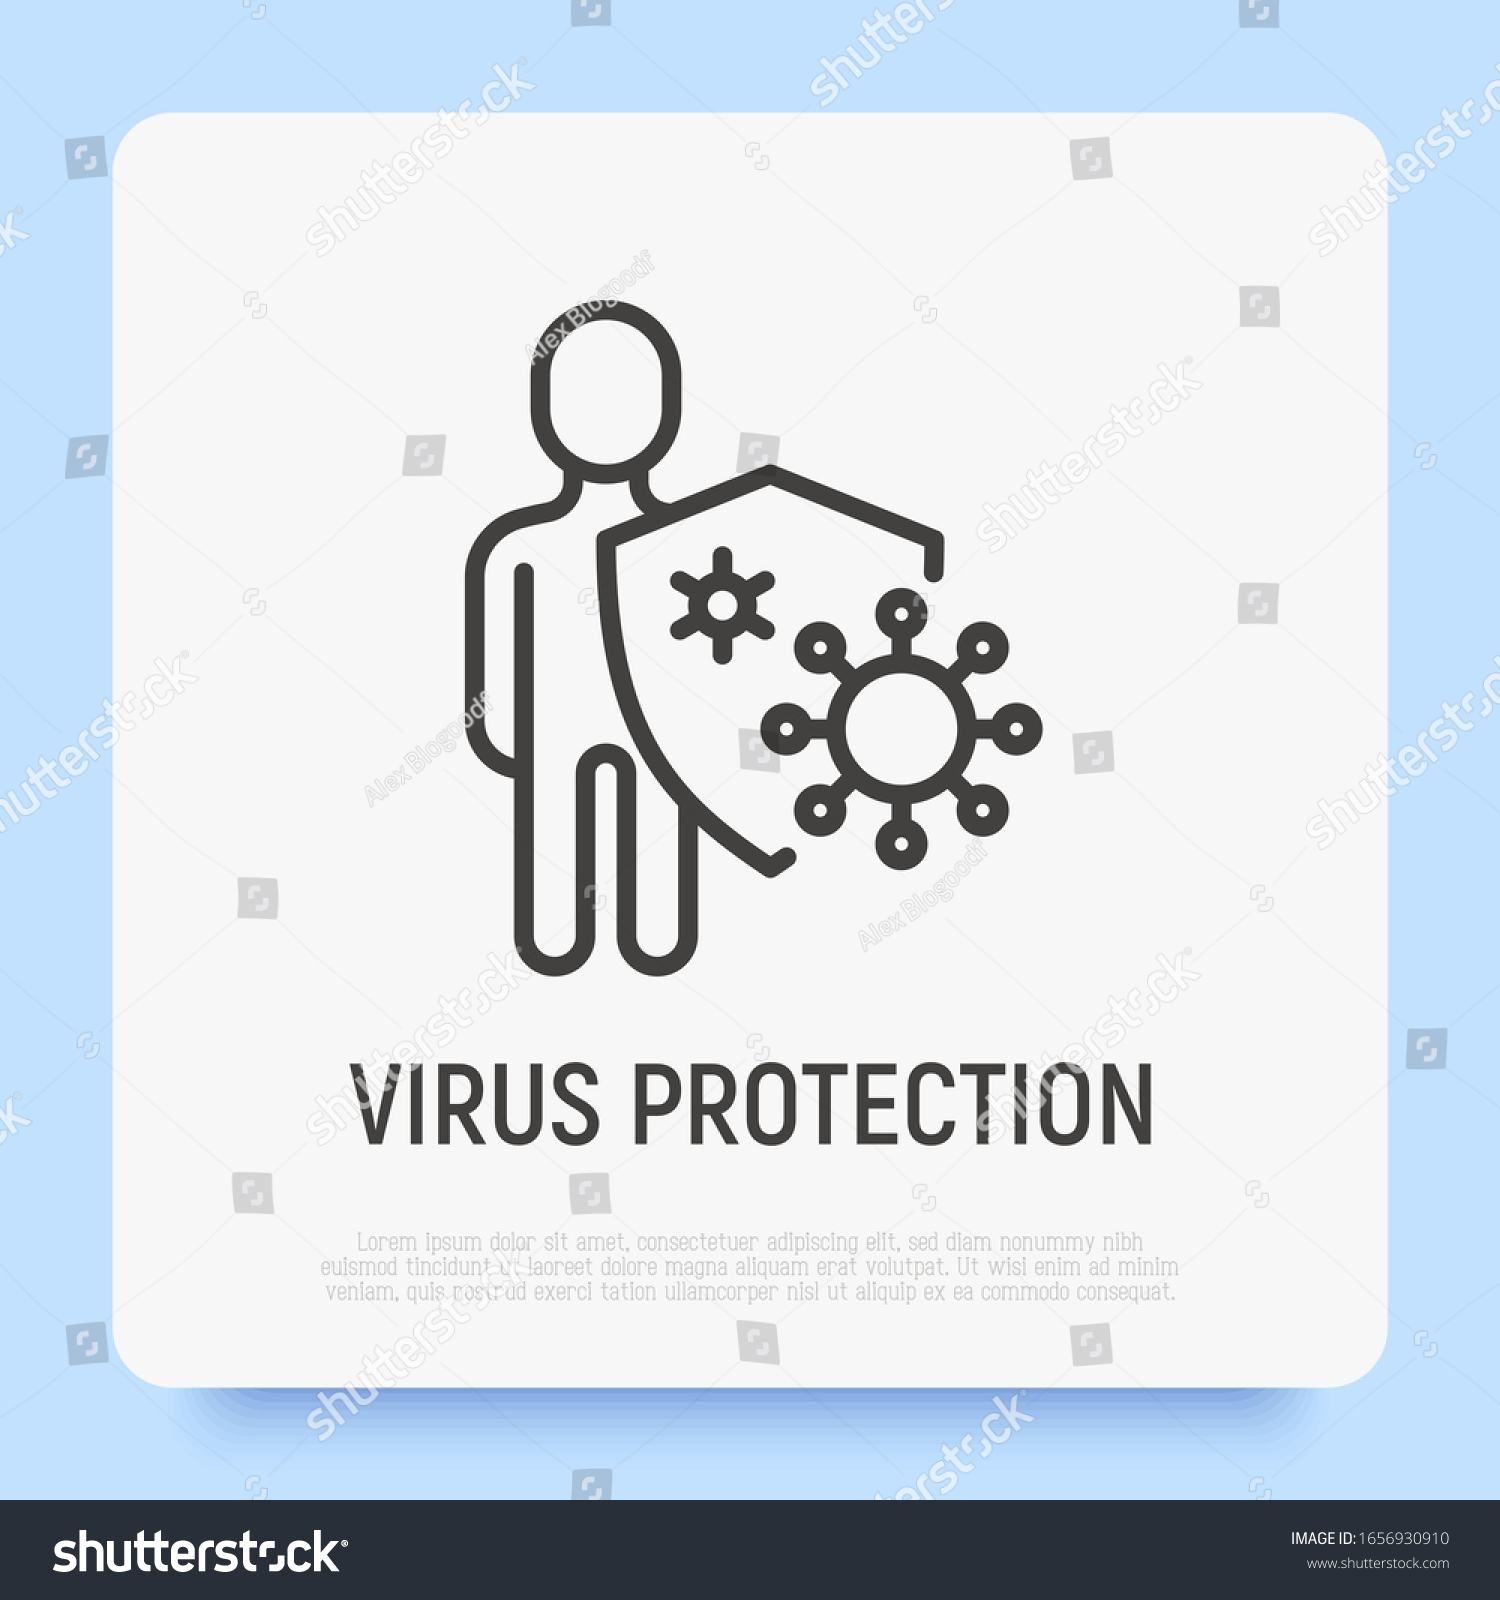 Virus protection: human is holding shield, bacterias can't attack him. Immune system, vaccination, antibiotics. Thin line icon. Modern vector illustration. #1656930910